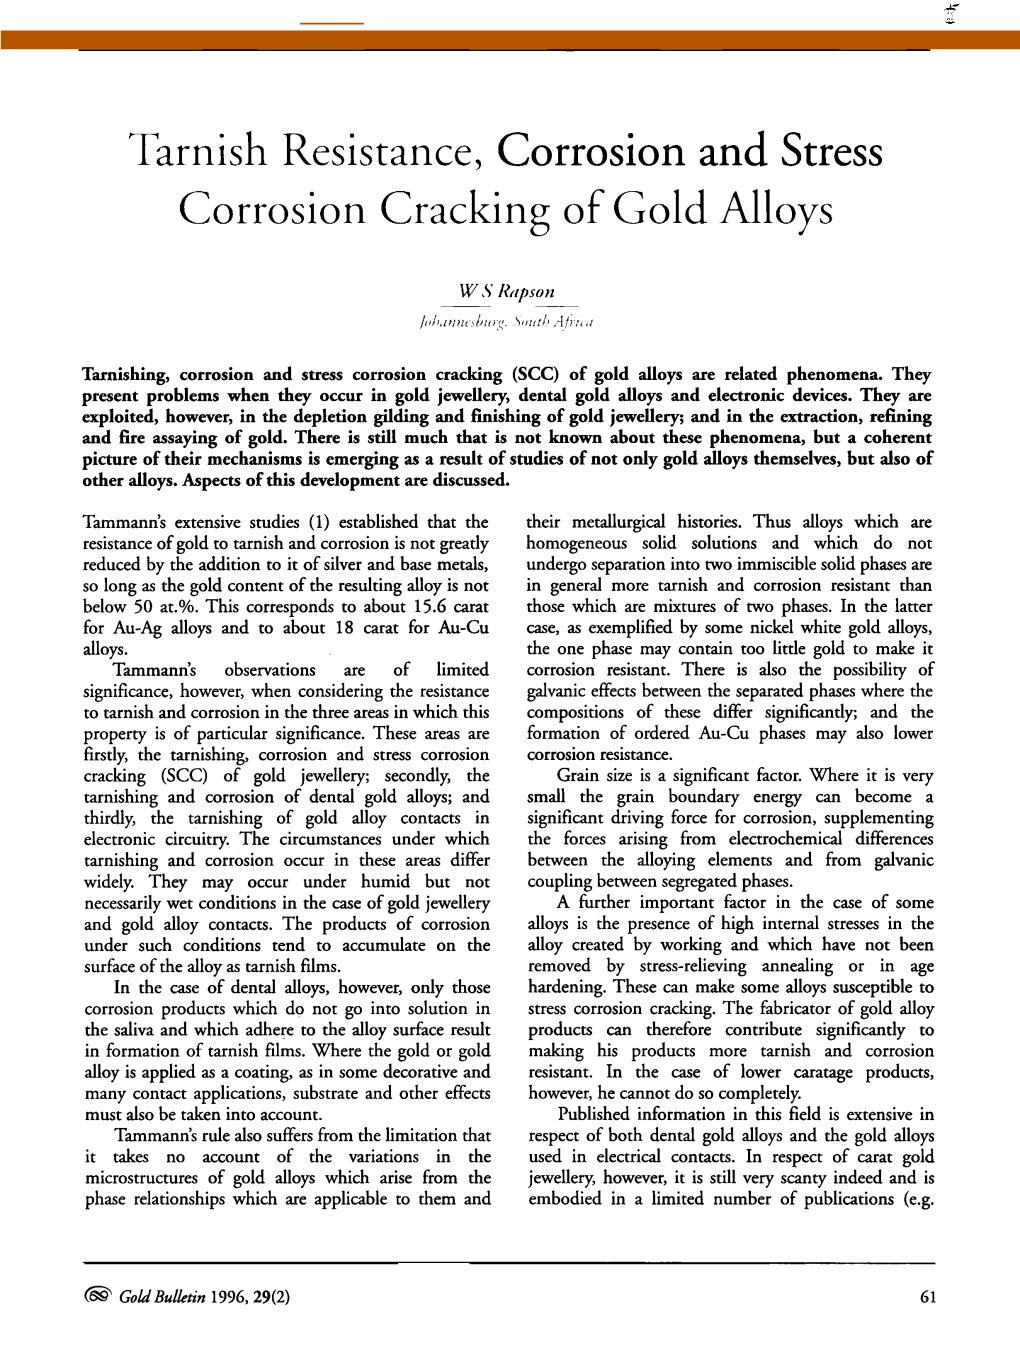 Tarnish Resistance, Corrosion and Stress Corrosion Cracking of Gold Alloys